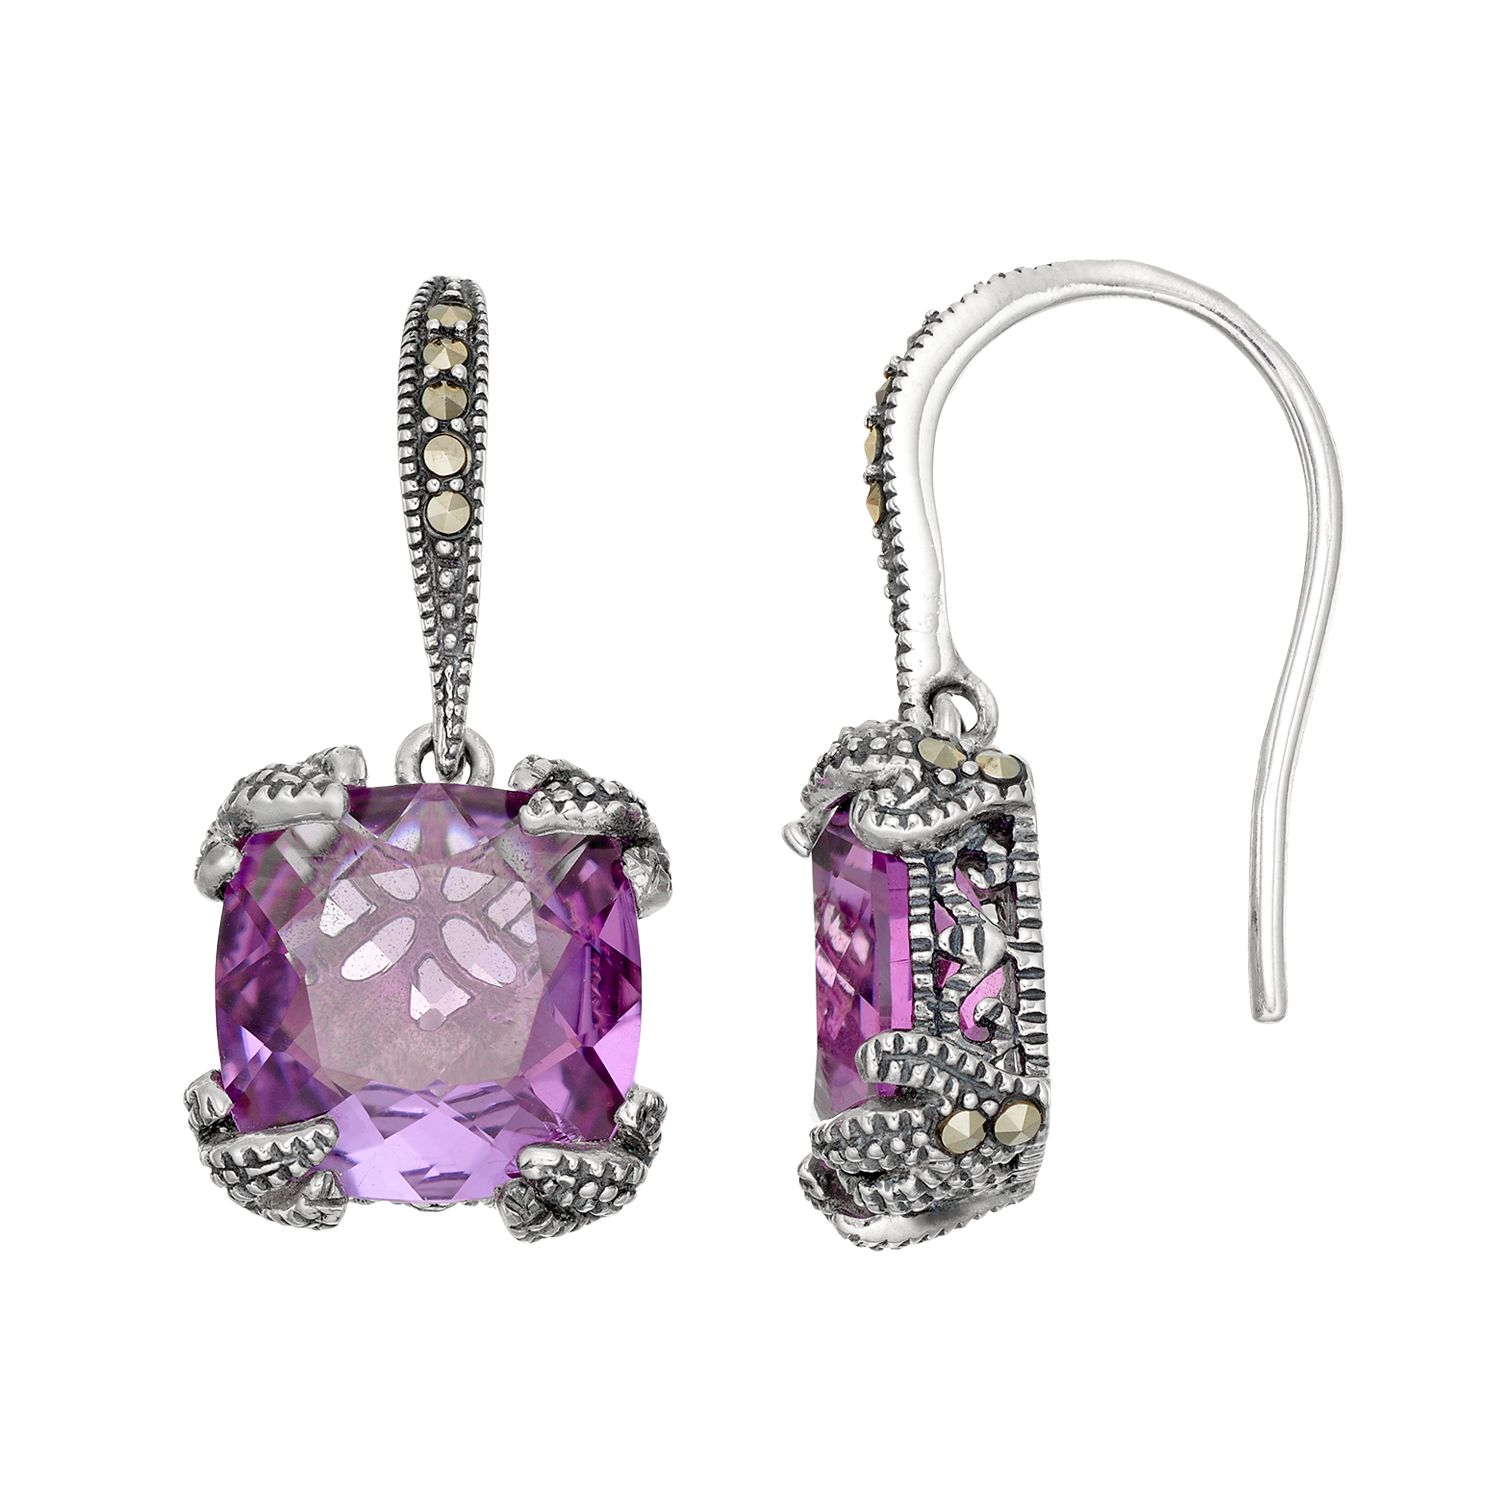 Image for Lavish by TJM Sterling Silver Lab-Created Amethyst & Marcasite Drop Earrings at Kohl's.